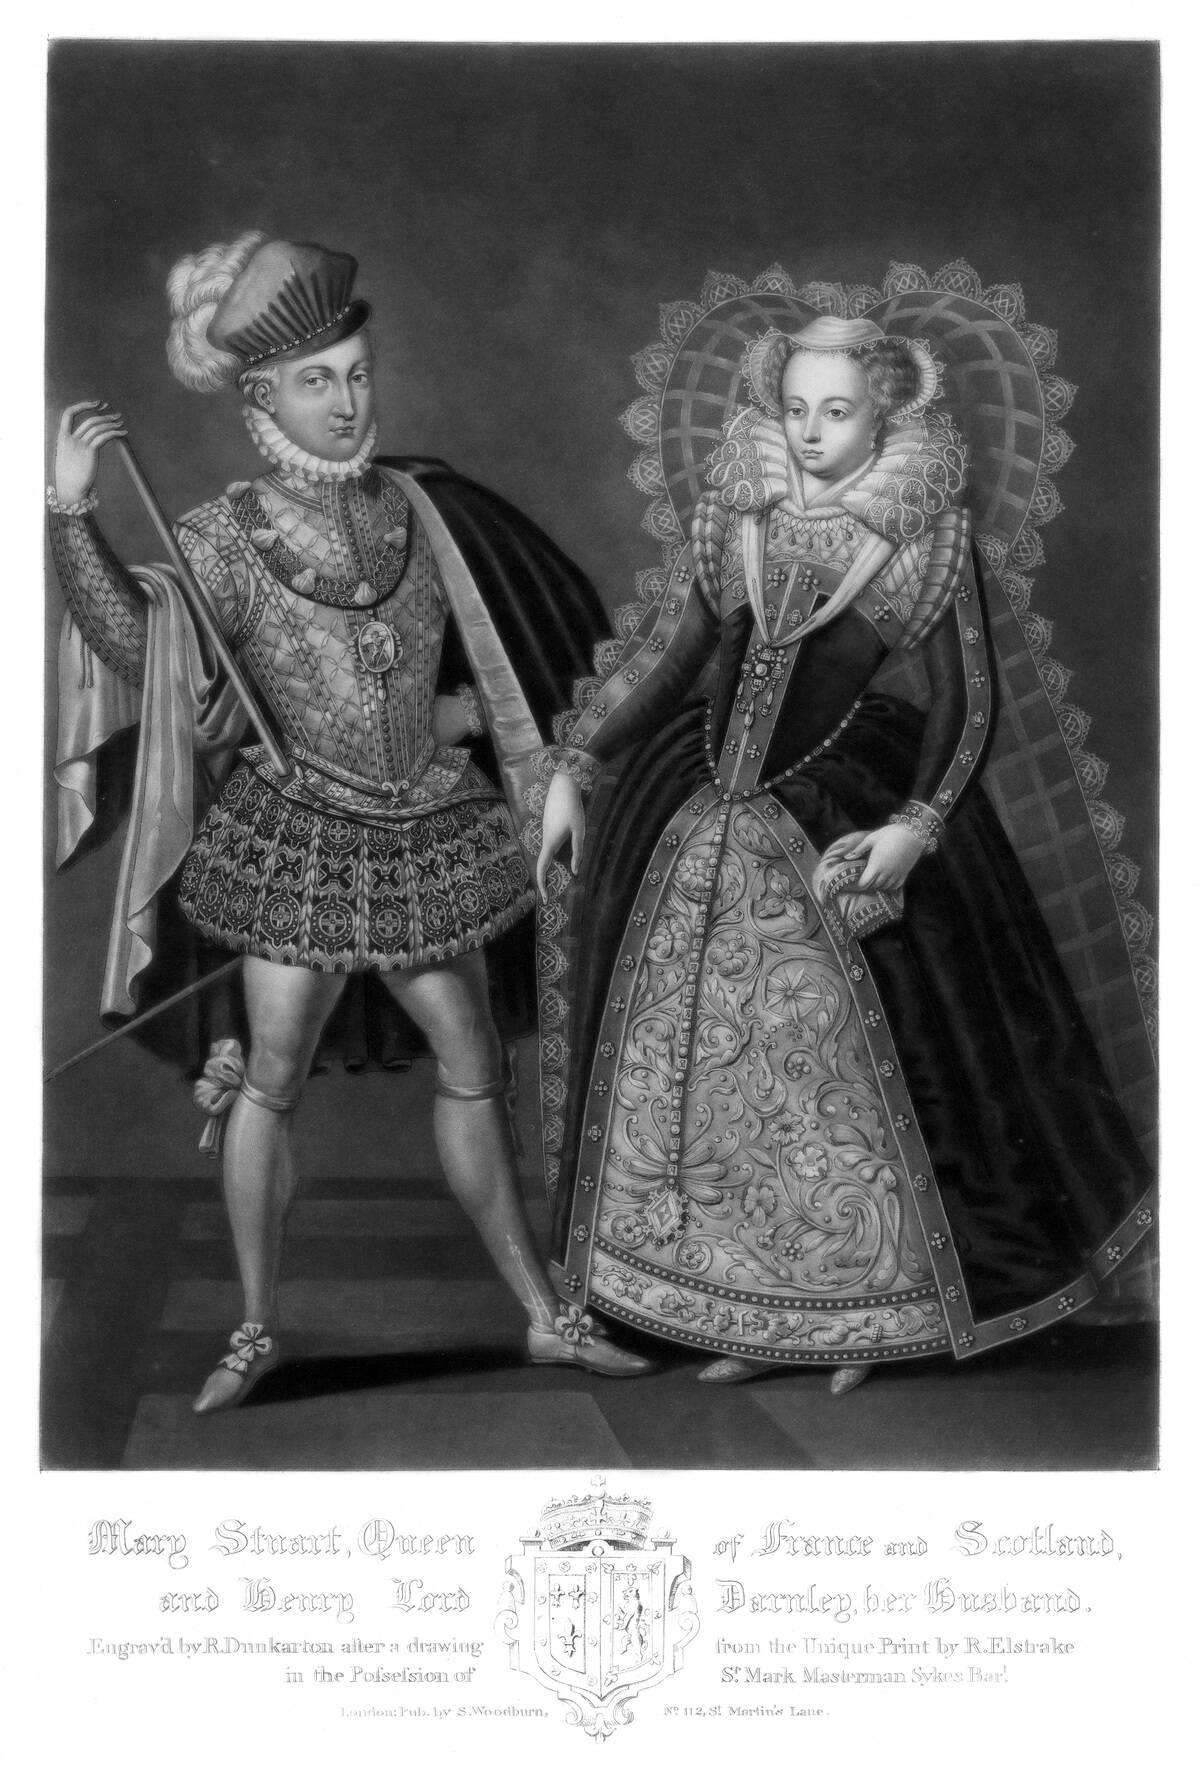 <p>In February 1565, Mary met her half-first cousin Lord Darnely and fell head over heels, believing him to be "the lustiest and best proportioned long man that she had seen" (he was over six feet tall). They got married five months later, making Darnley the king consort of Scotland. Then his true colors came to light.</p> <p>Underneath his alleged good looks, Darnley proved himself to be a vain, arrogant man with a violent streak encouraged by alcohol. He demanded the Crown Matrimonial, which would make him co-sovereign of Scotland, but Mary refused. Things only got worse from there.</p>